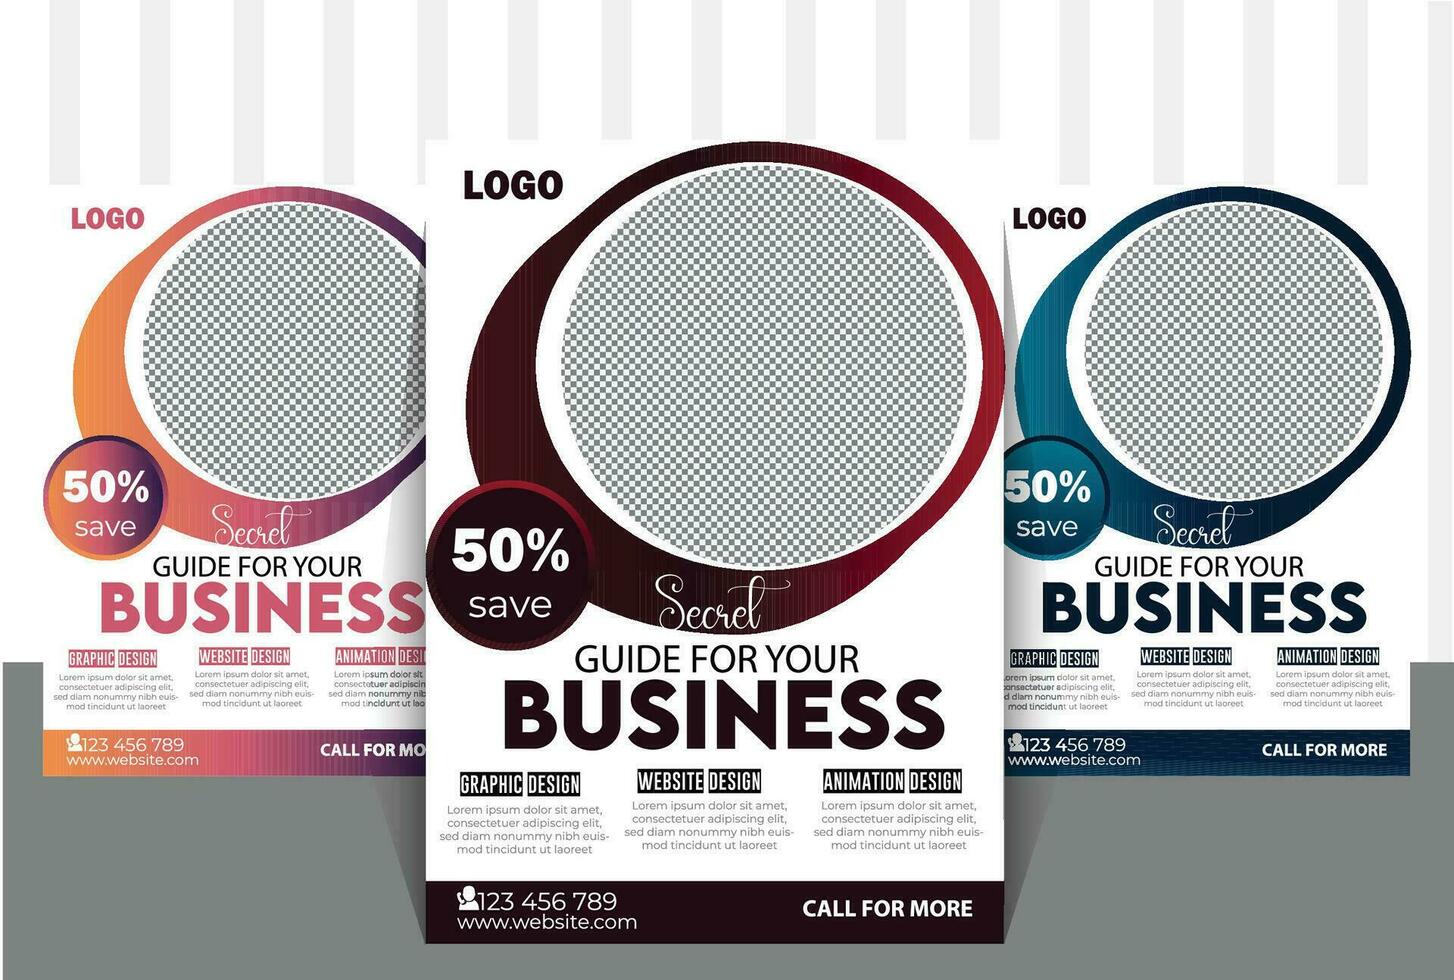 Business flyer design white background design colors red blue and yellow vector